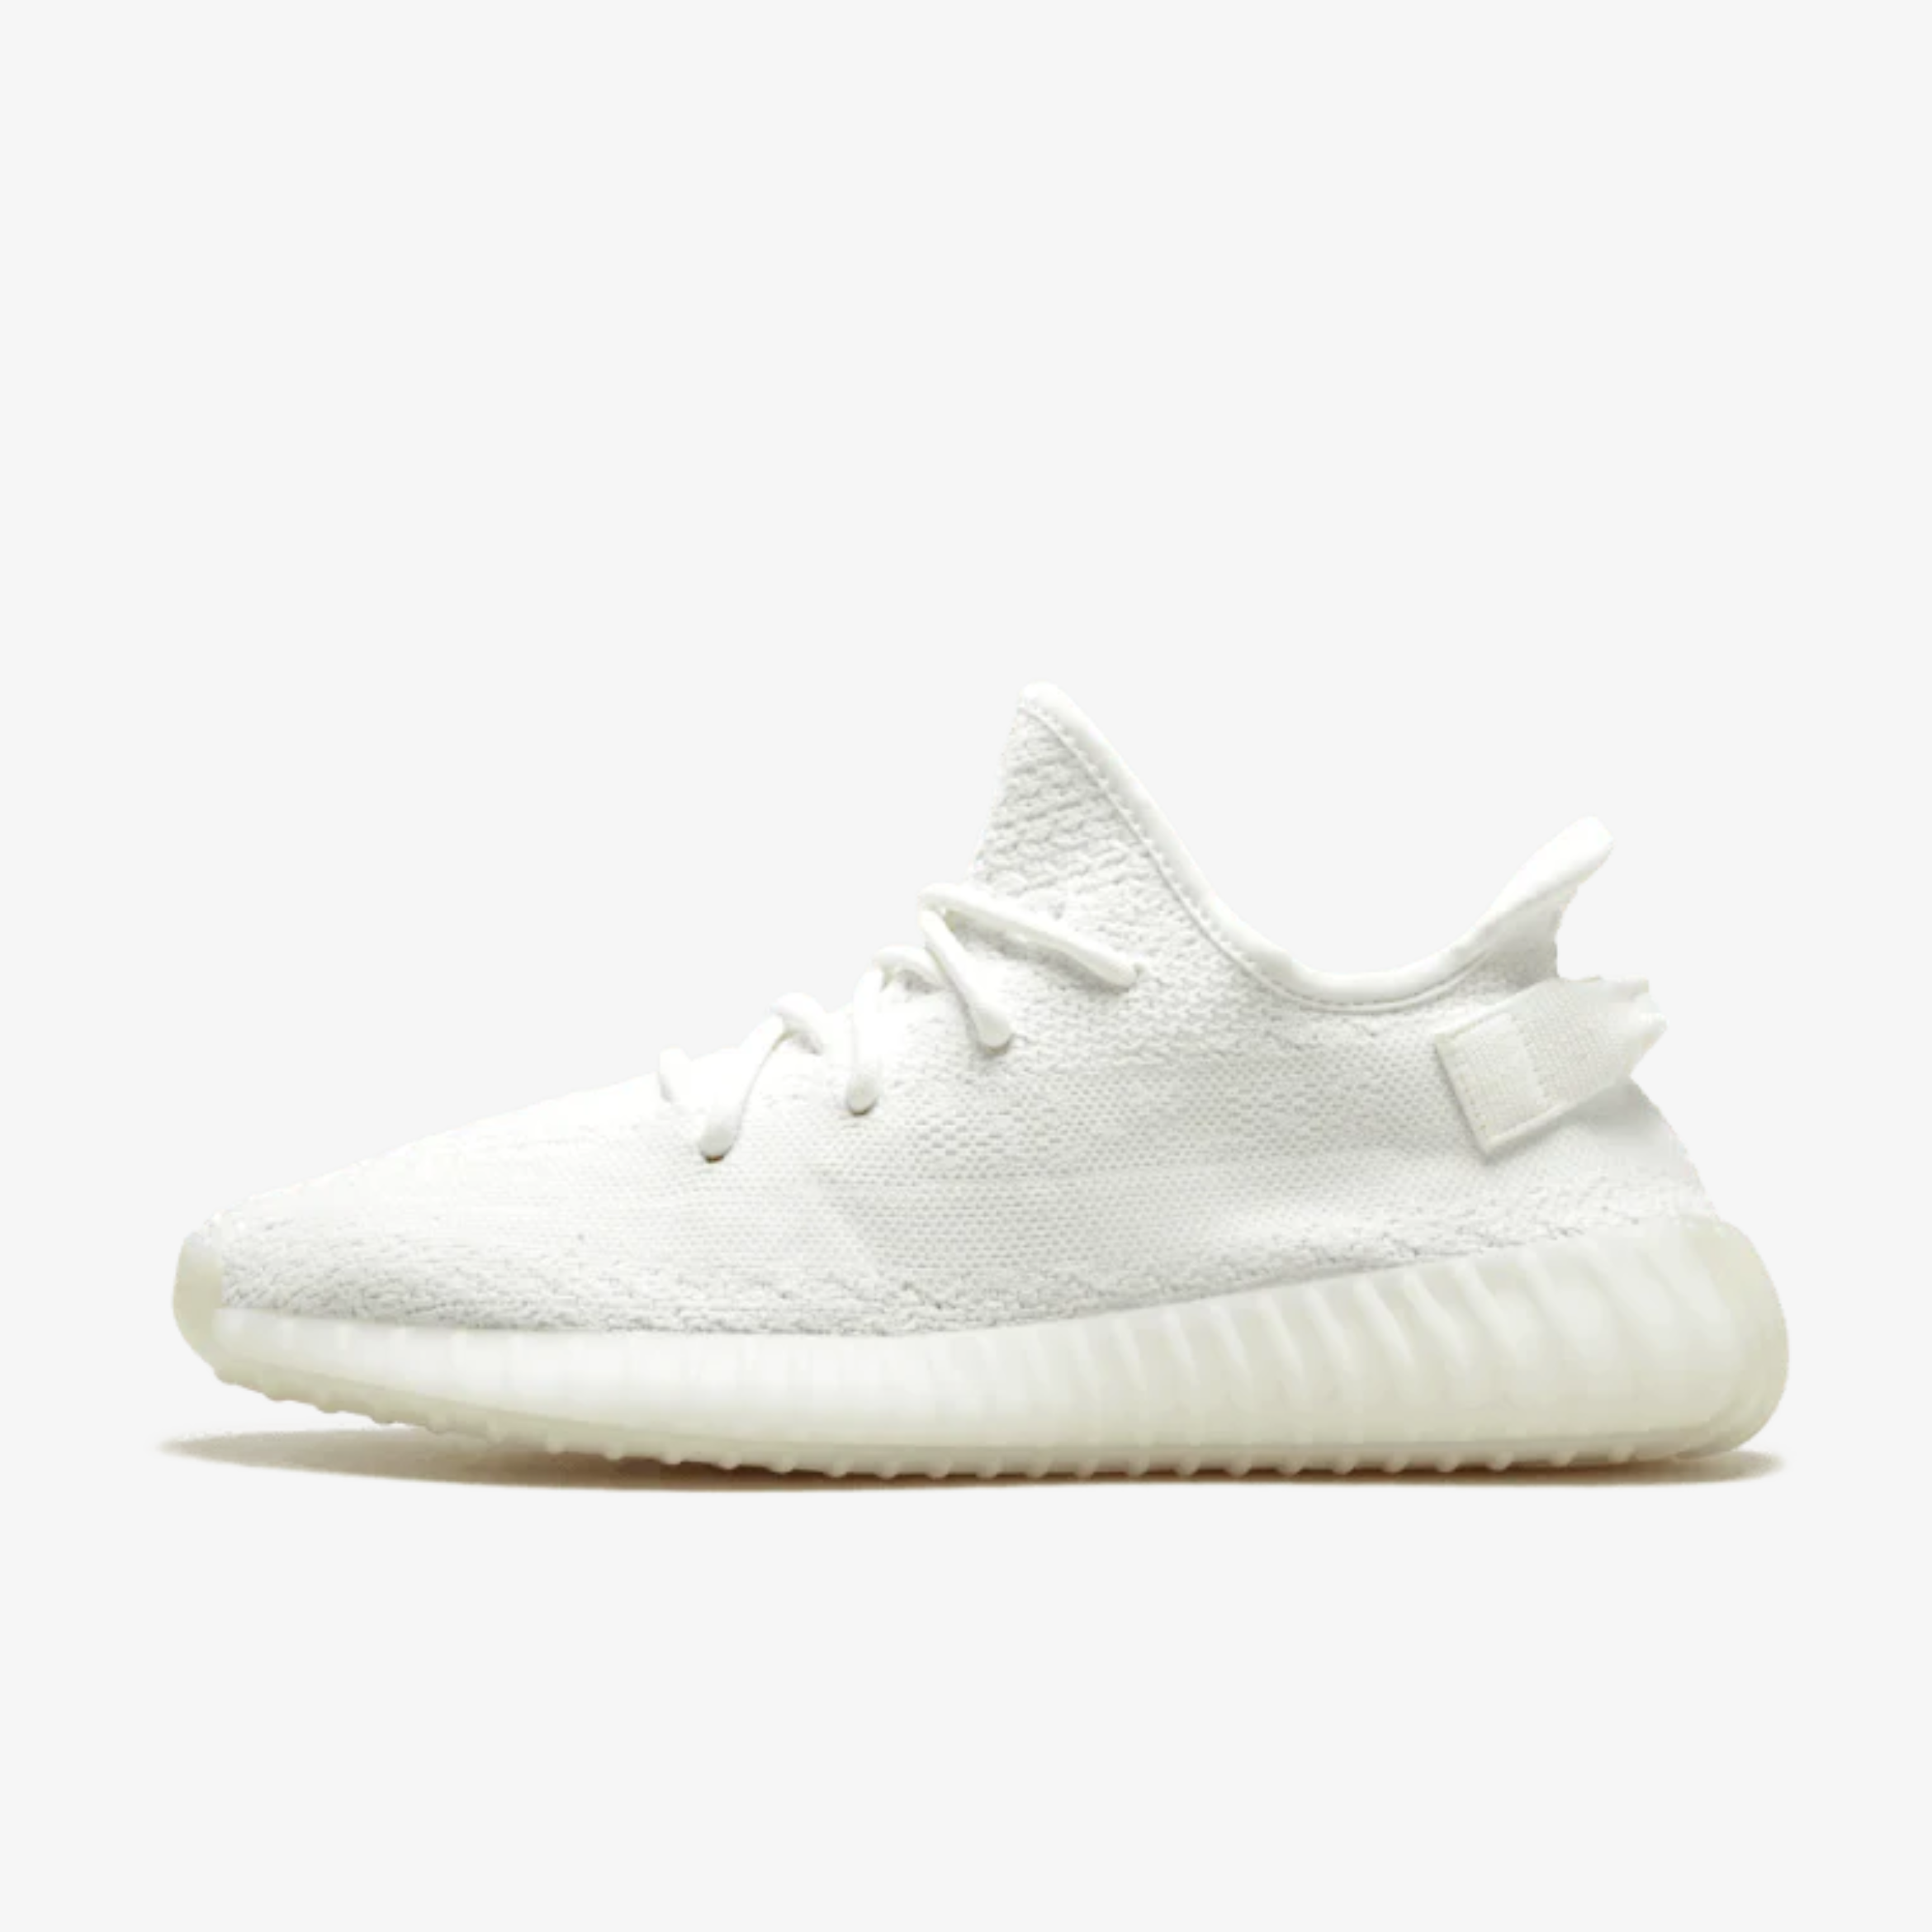 Step up your style with the Yeezy Boost 350 V2 Cream/Triple White the  ultimate blend of fashion and comfort.